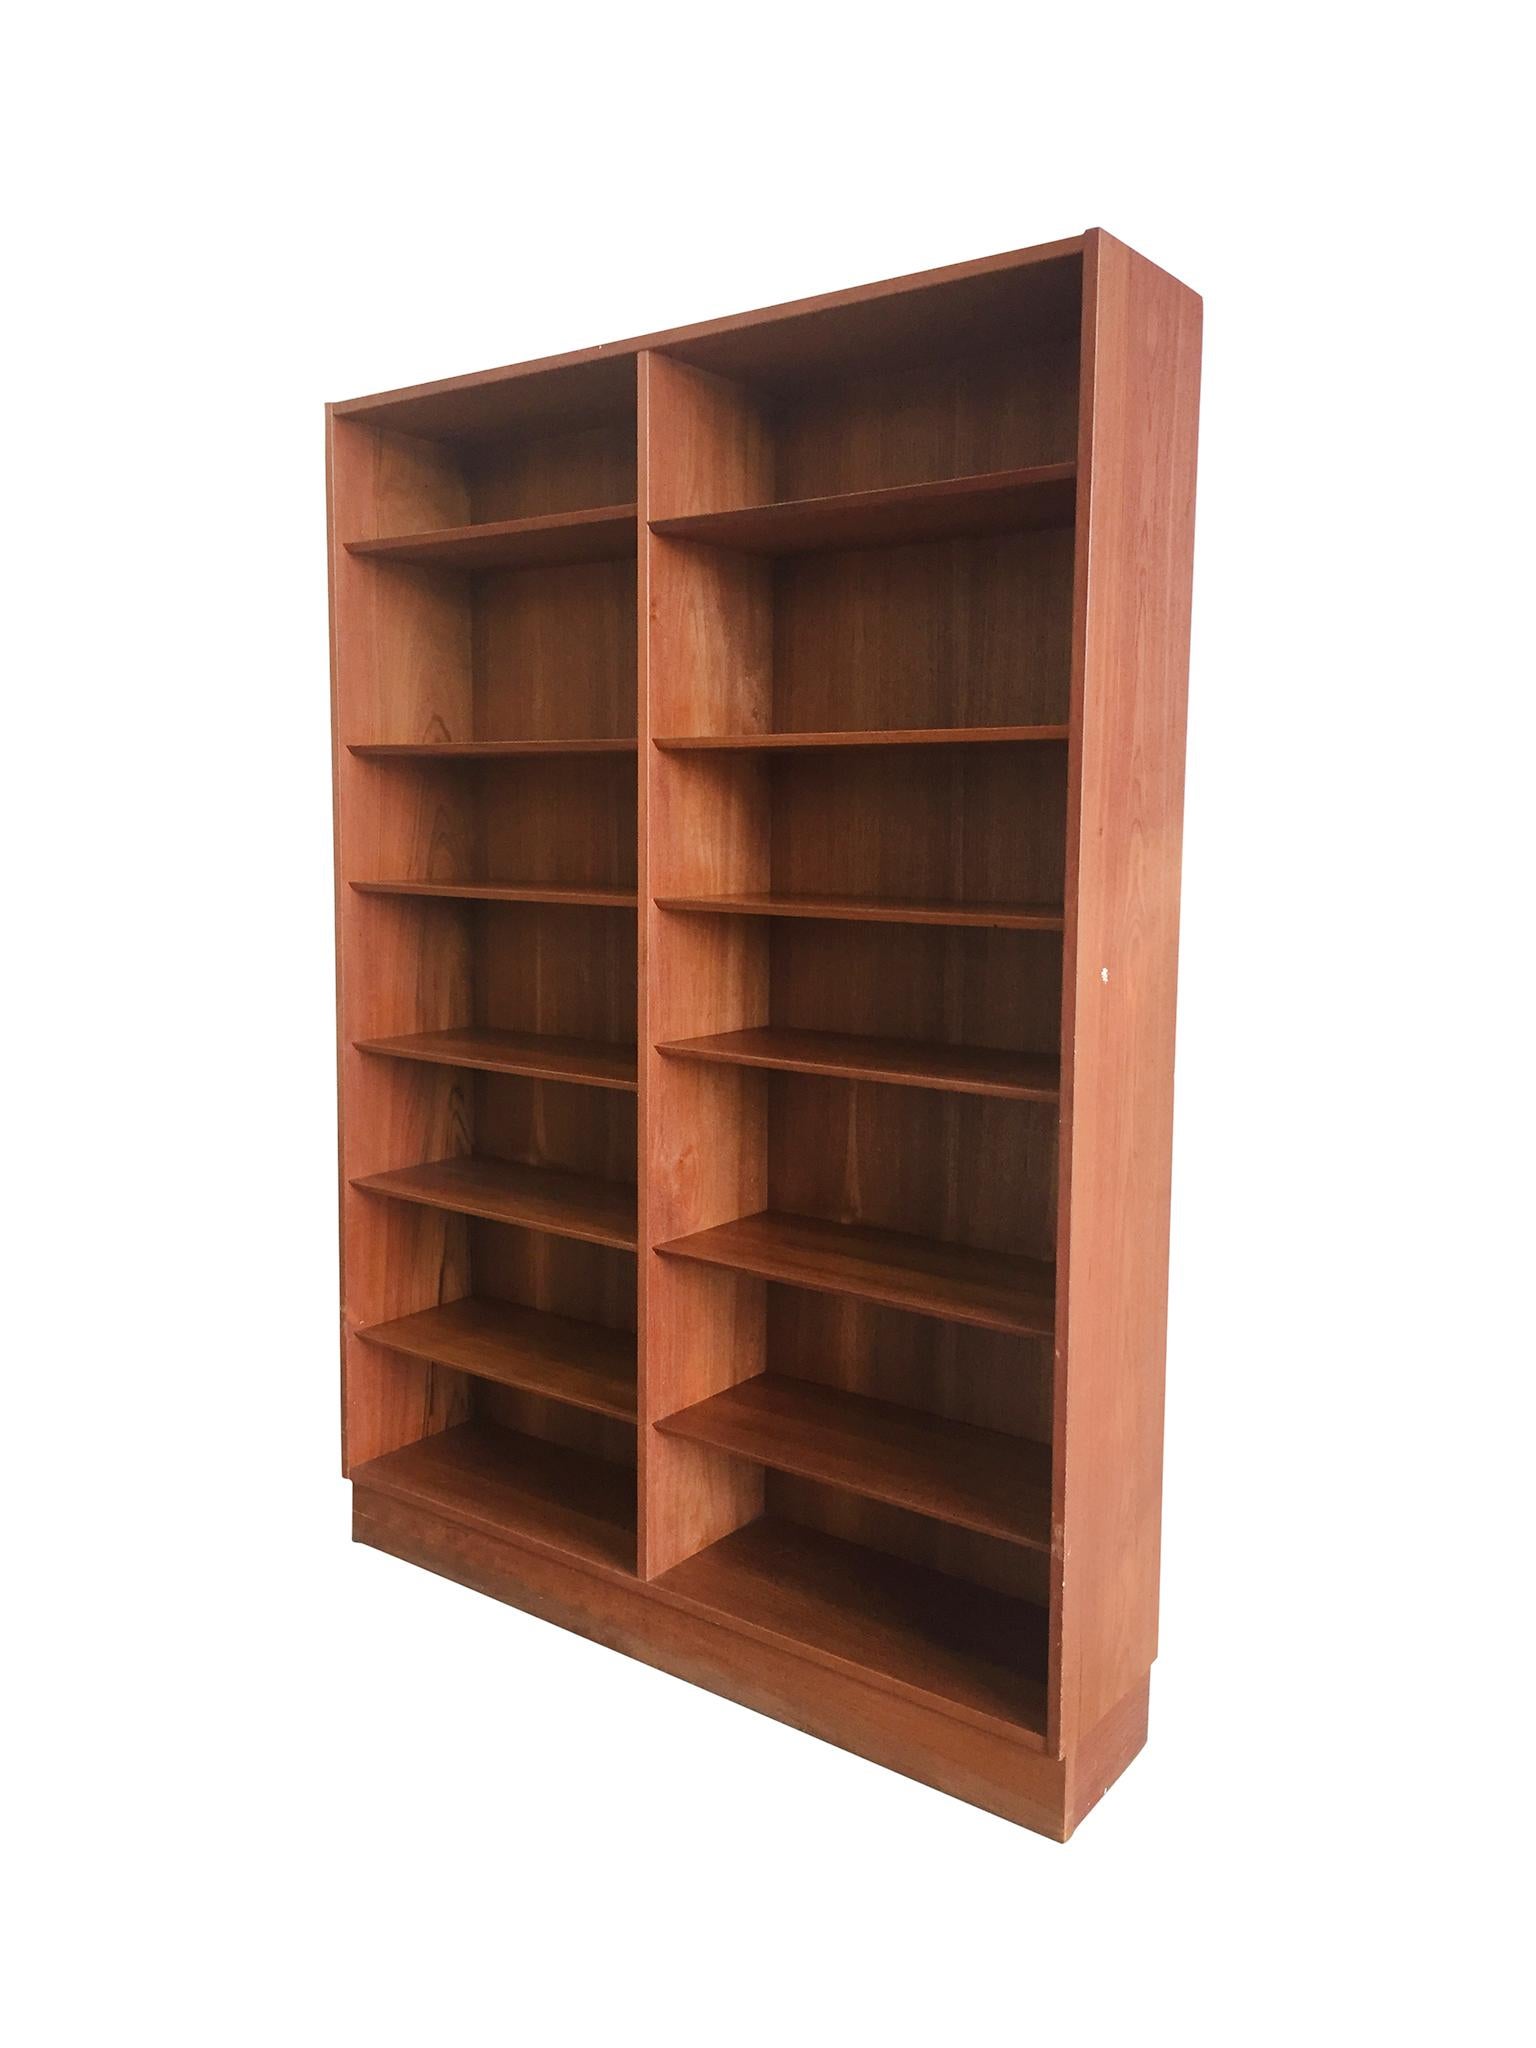 A modern bookcase streamlined into a minimal, elegant form. Designed by Poul Hundevad, mid-20th century. The bookcase is comprised of teak that's patinated in a warm honey-brown tone. The bookcase is crafted exquisitely into two columns of shelves.